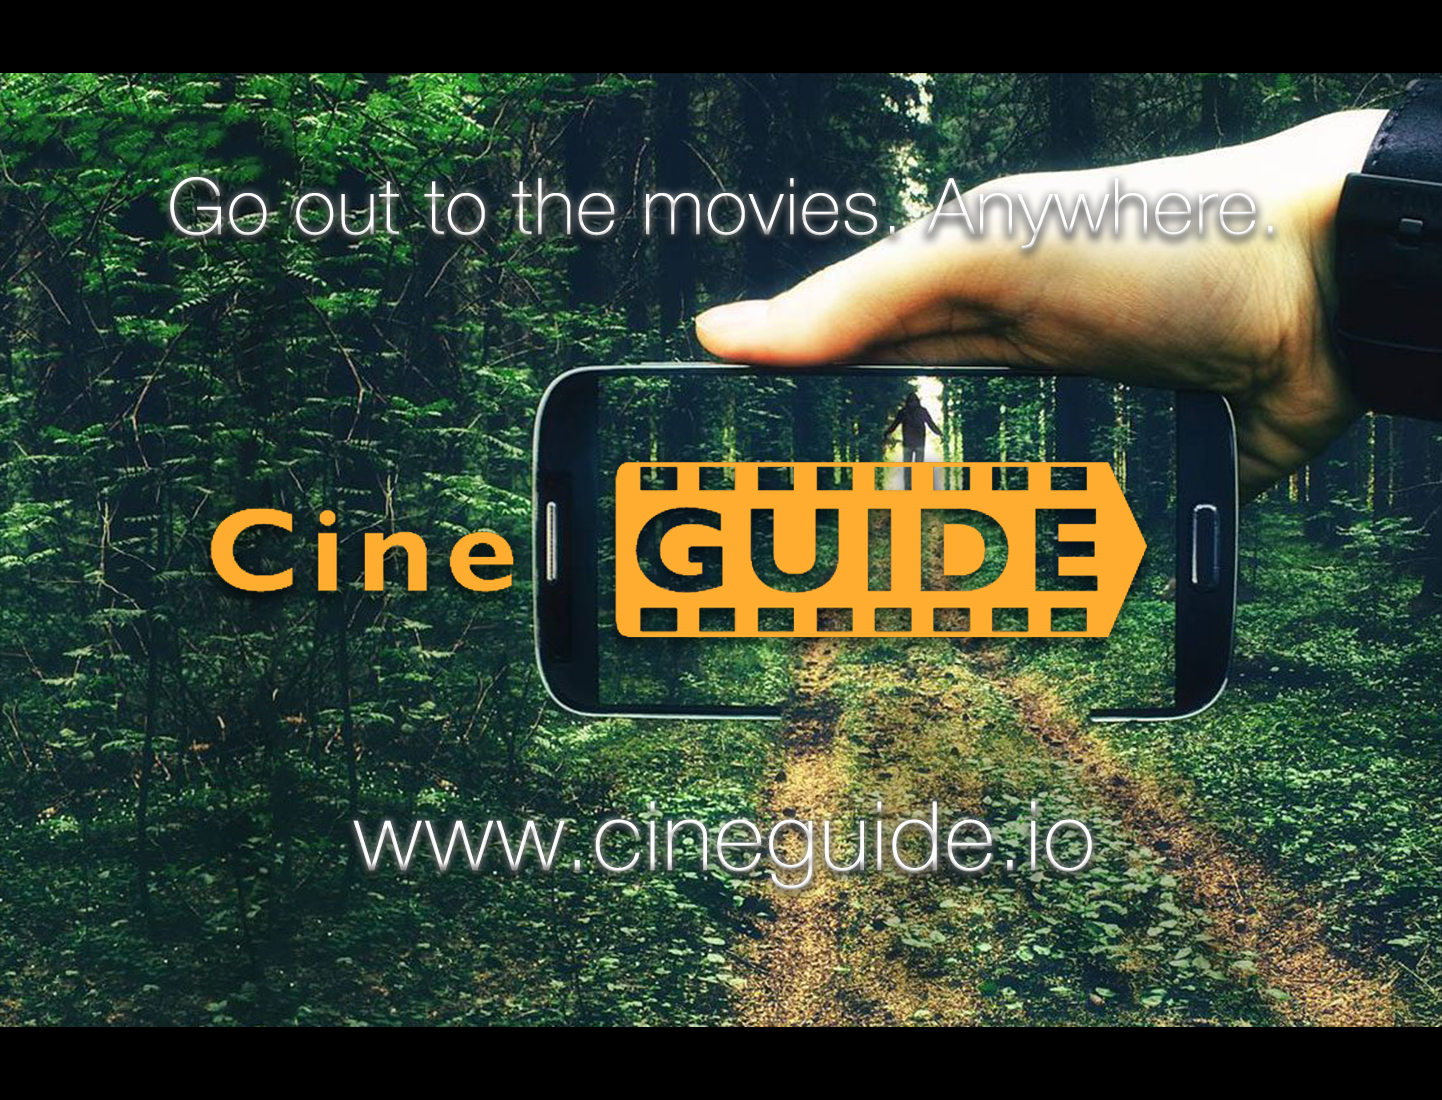 Cineguide - Mobile Augmented Reality Application